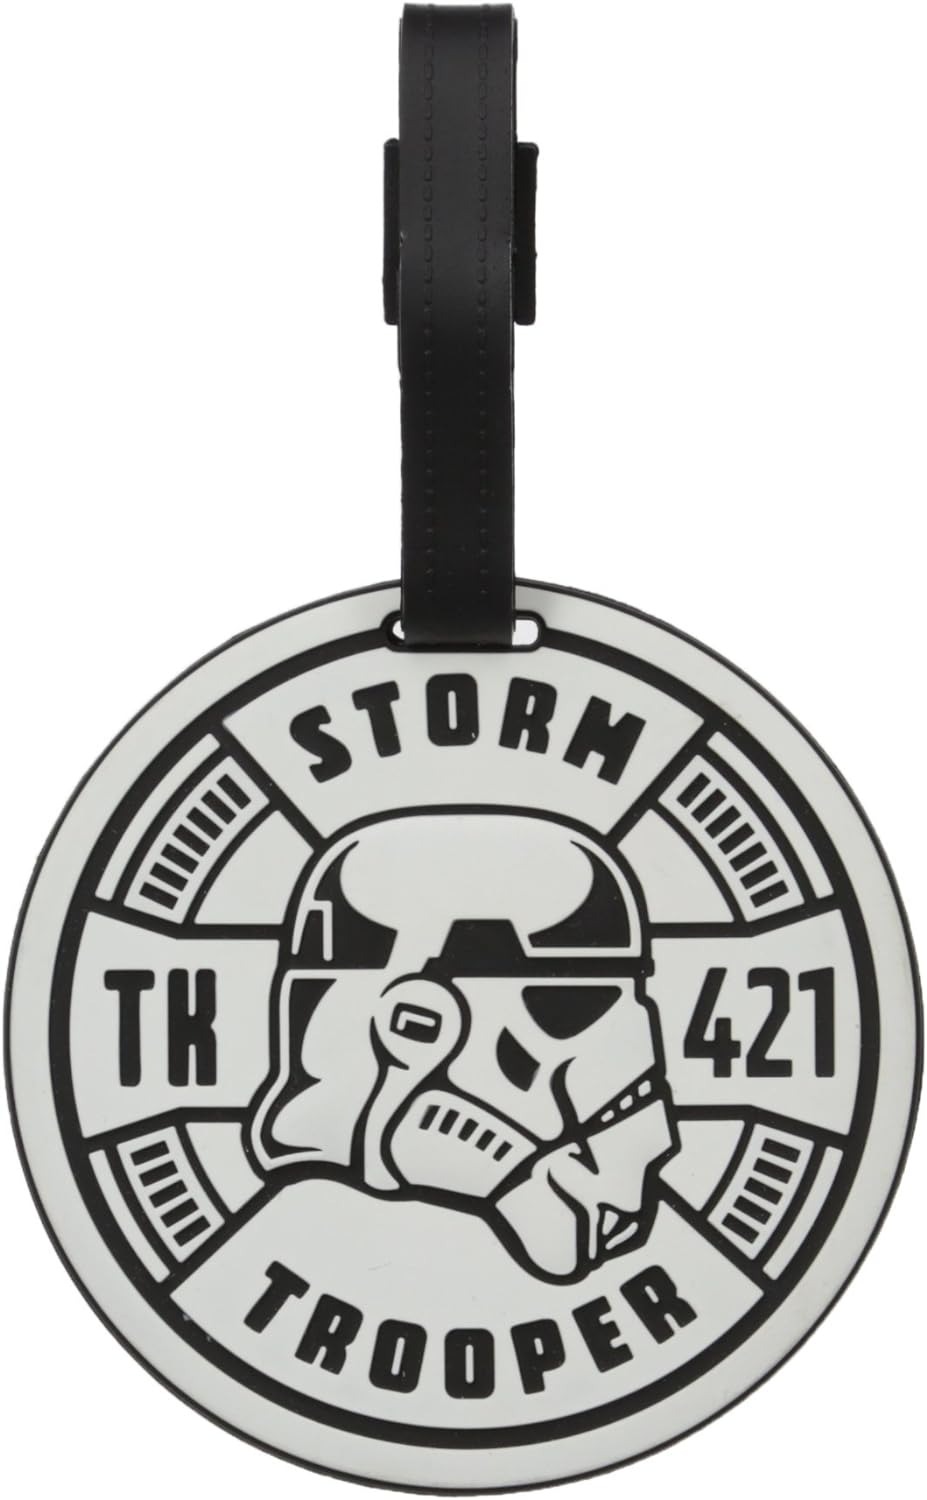 Amazon: American Tourister Star Wars Luggage Tag Storm Trooper $2.77 + Free Shipping w/ Prime or on $35+